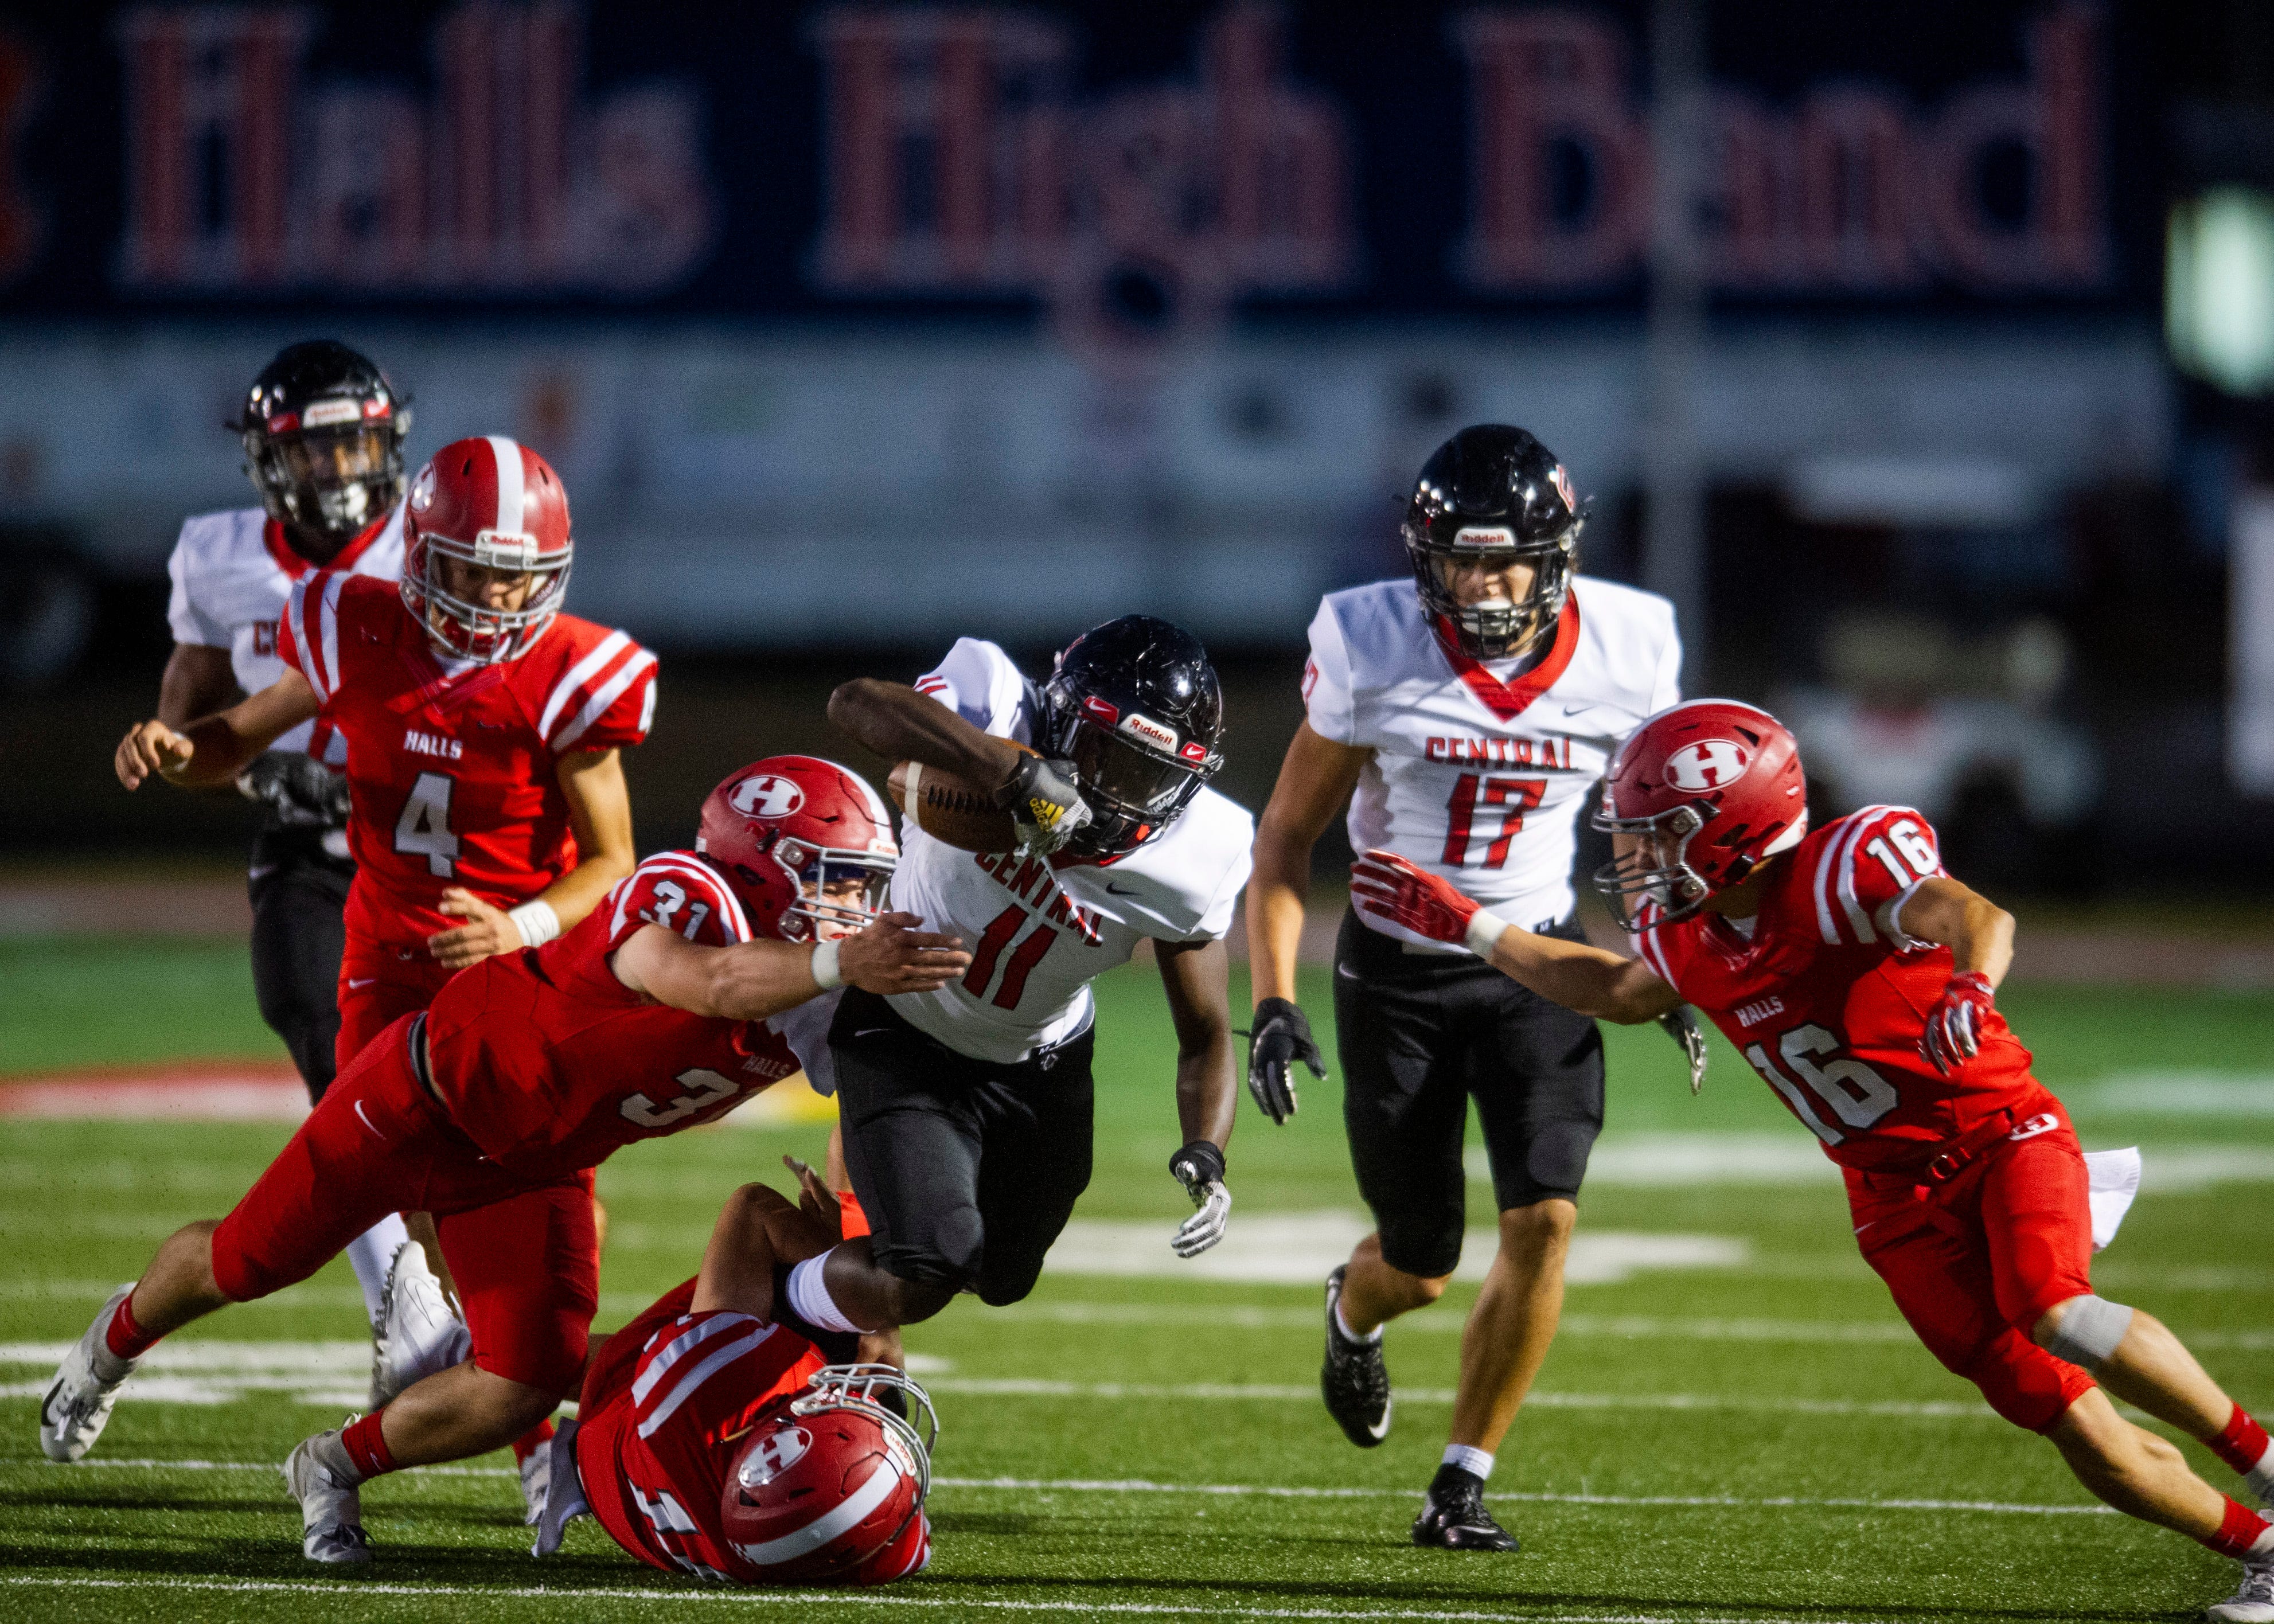 Central's Jason Merritts (11) is tackled by Halls' Brett McMahan (31) and Jackson Cates (14) during the Halls and Central high school football game on Friday, October 4, 2019 at Halls High School.